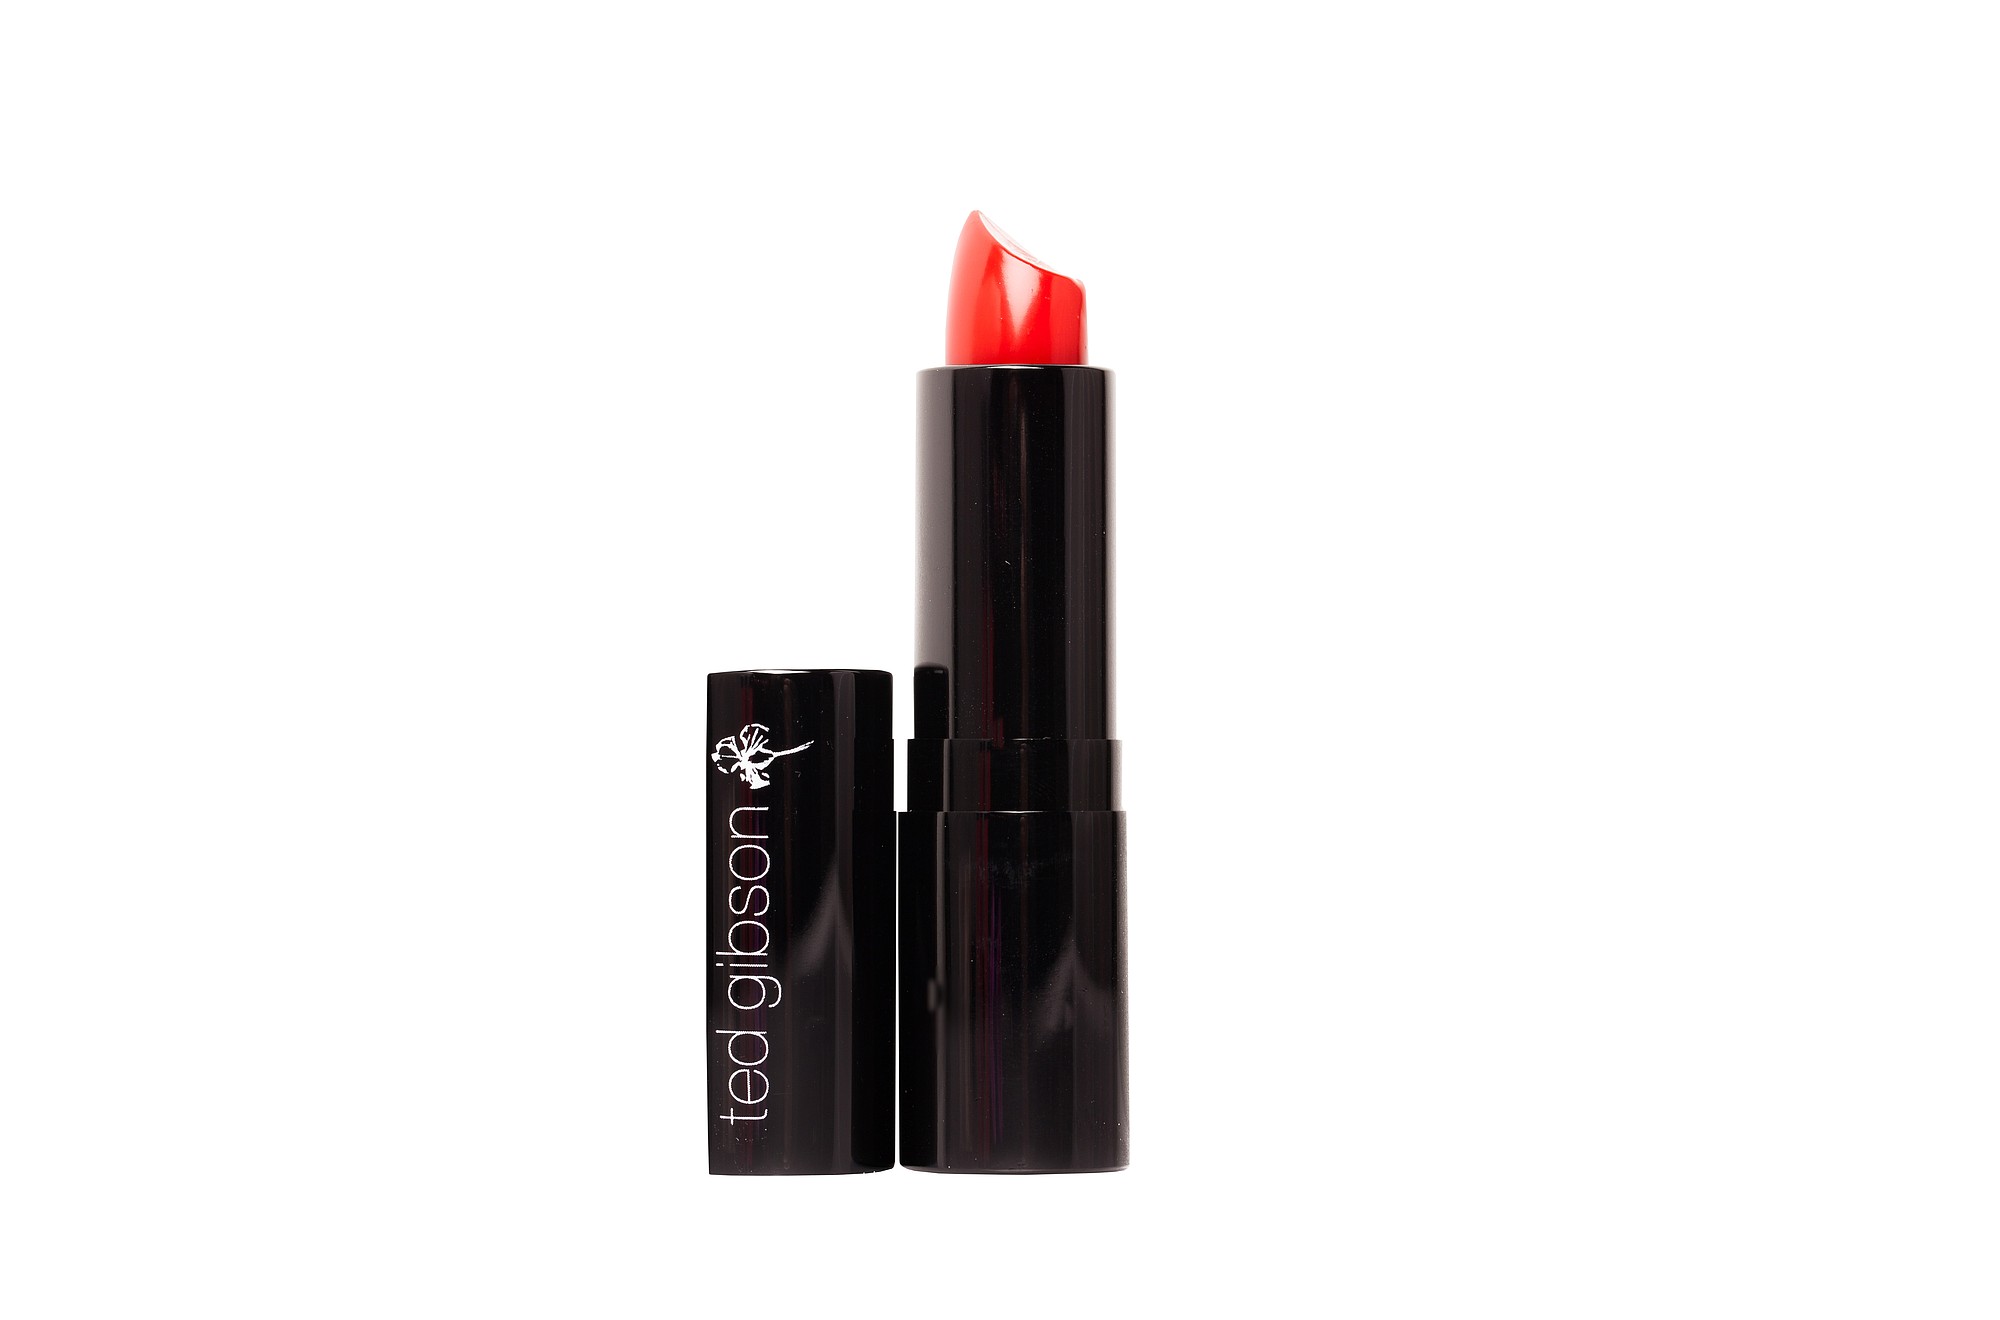 This product image provided by Ted Gibson shows a red lipstick in a shade called Charice. Shades of red no longer have to evoke sexpot, and they don't have to be drying to stay in place. They can be had in balms, glosses, creamy mattes or a combination of care and color.